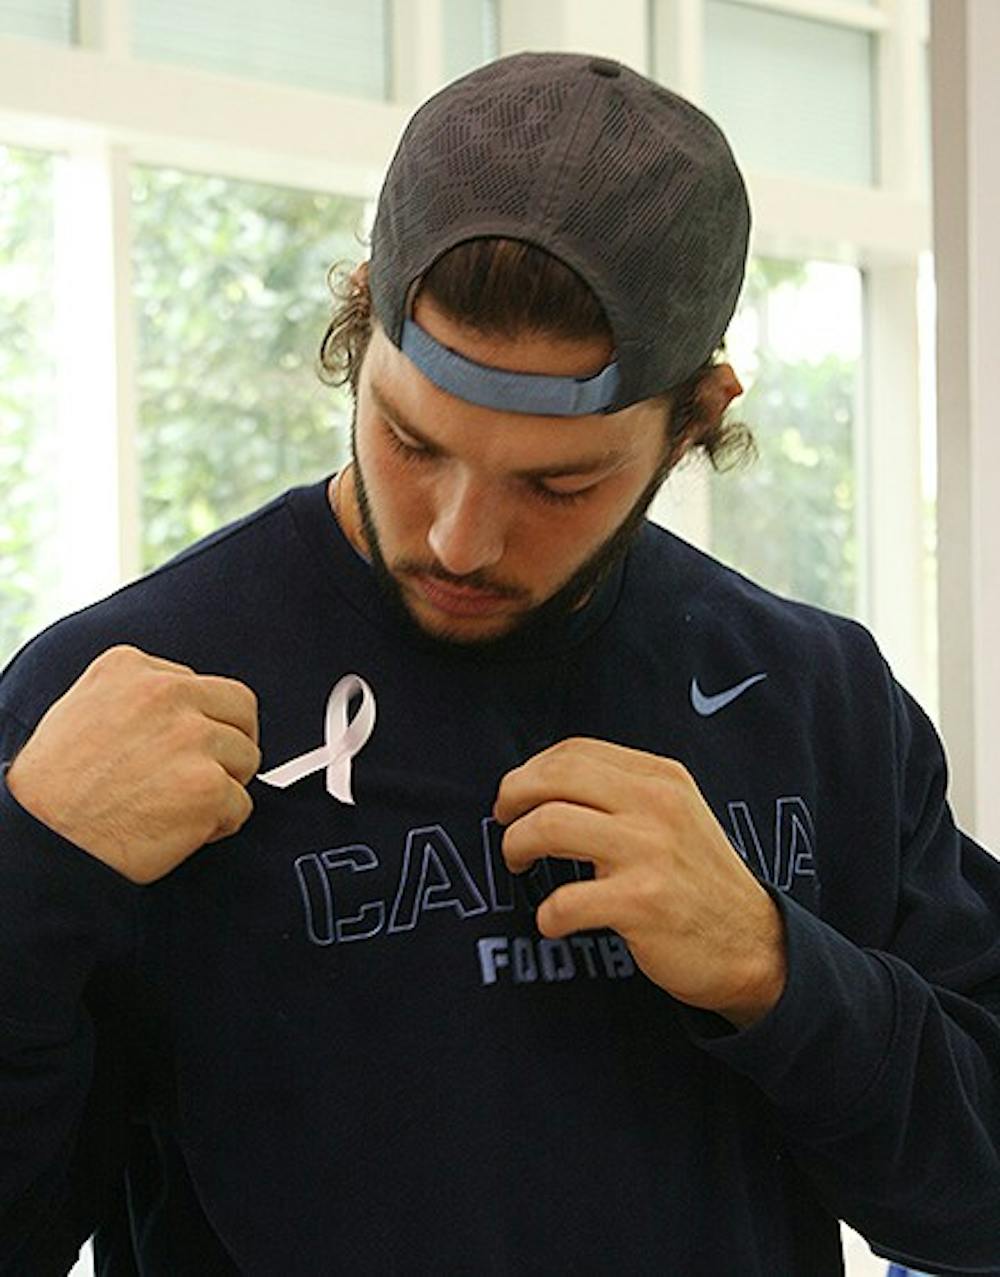 Nick Weiler, a sophomore on the football team, shows his support for Domestic Violence Awareness month by participating in the 7th annual "Carolina Men Care" event. This is when UNC athletes pair up with BEACON Child and Family Program at the UNC Children's Hospital to spread awareness about domestic violence and sexual assault. 